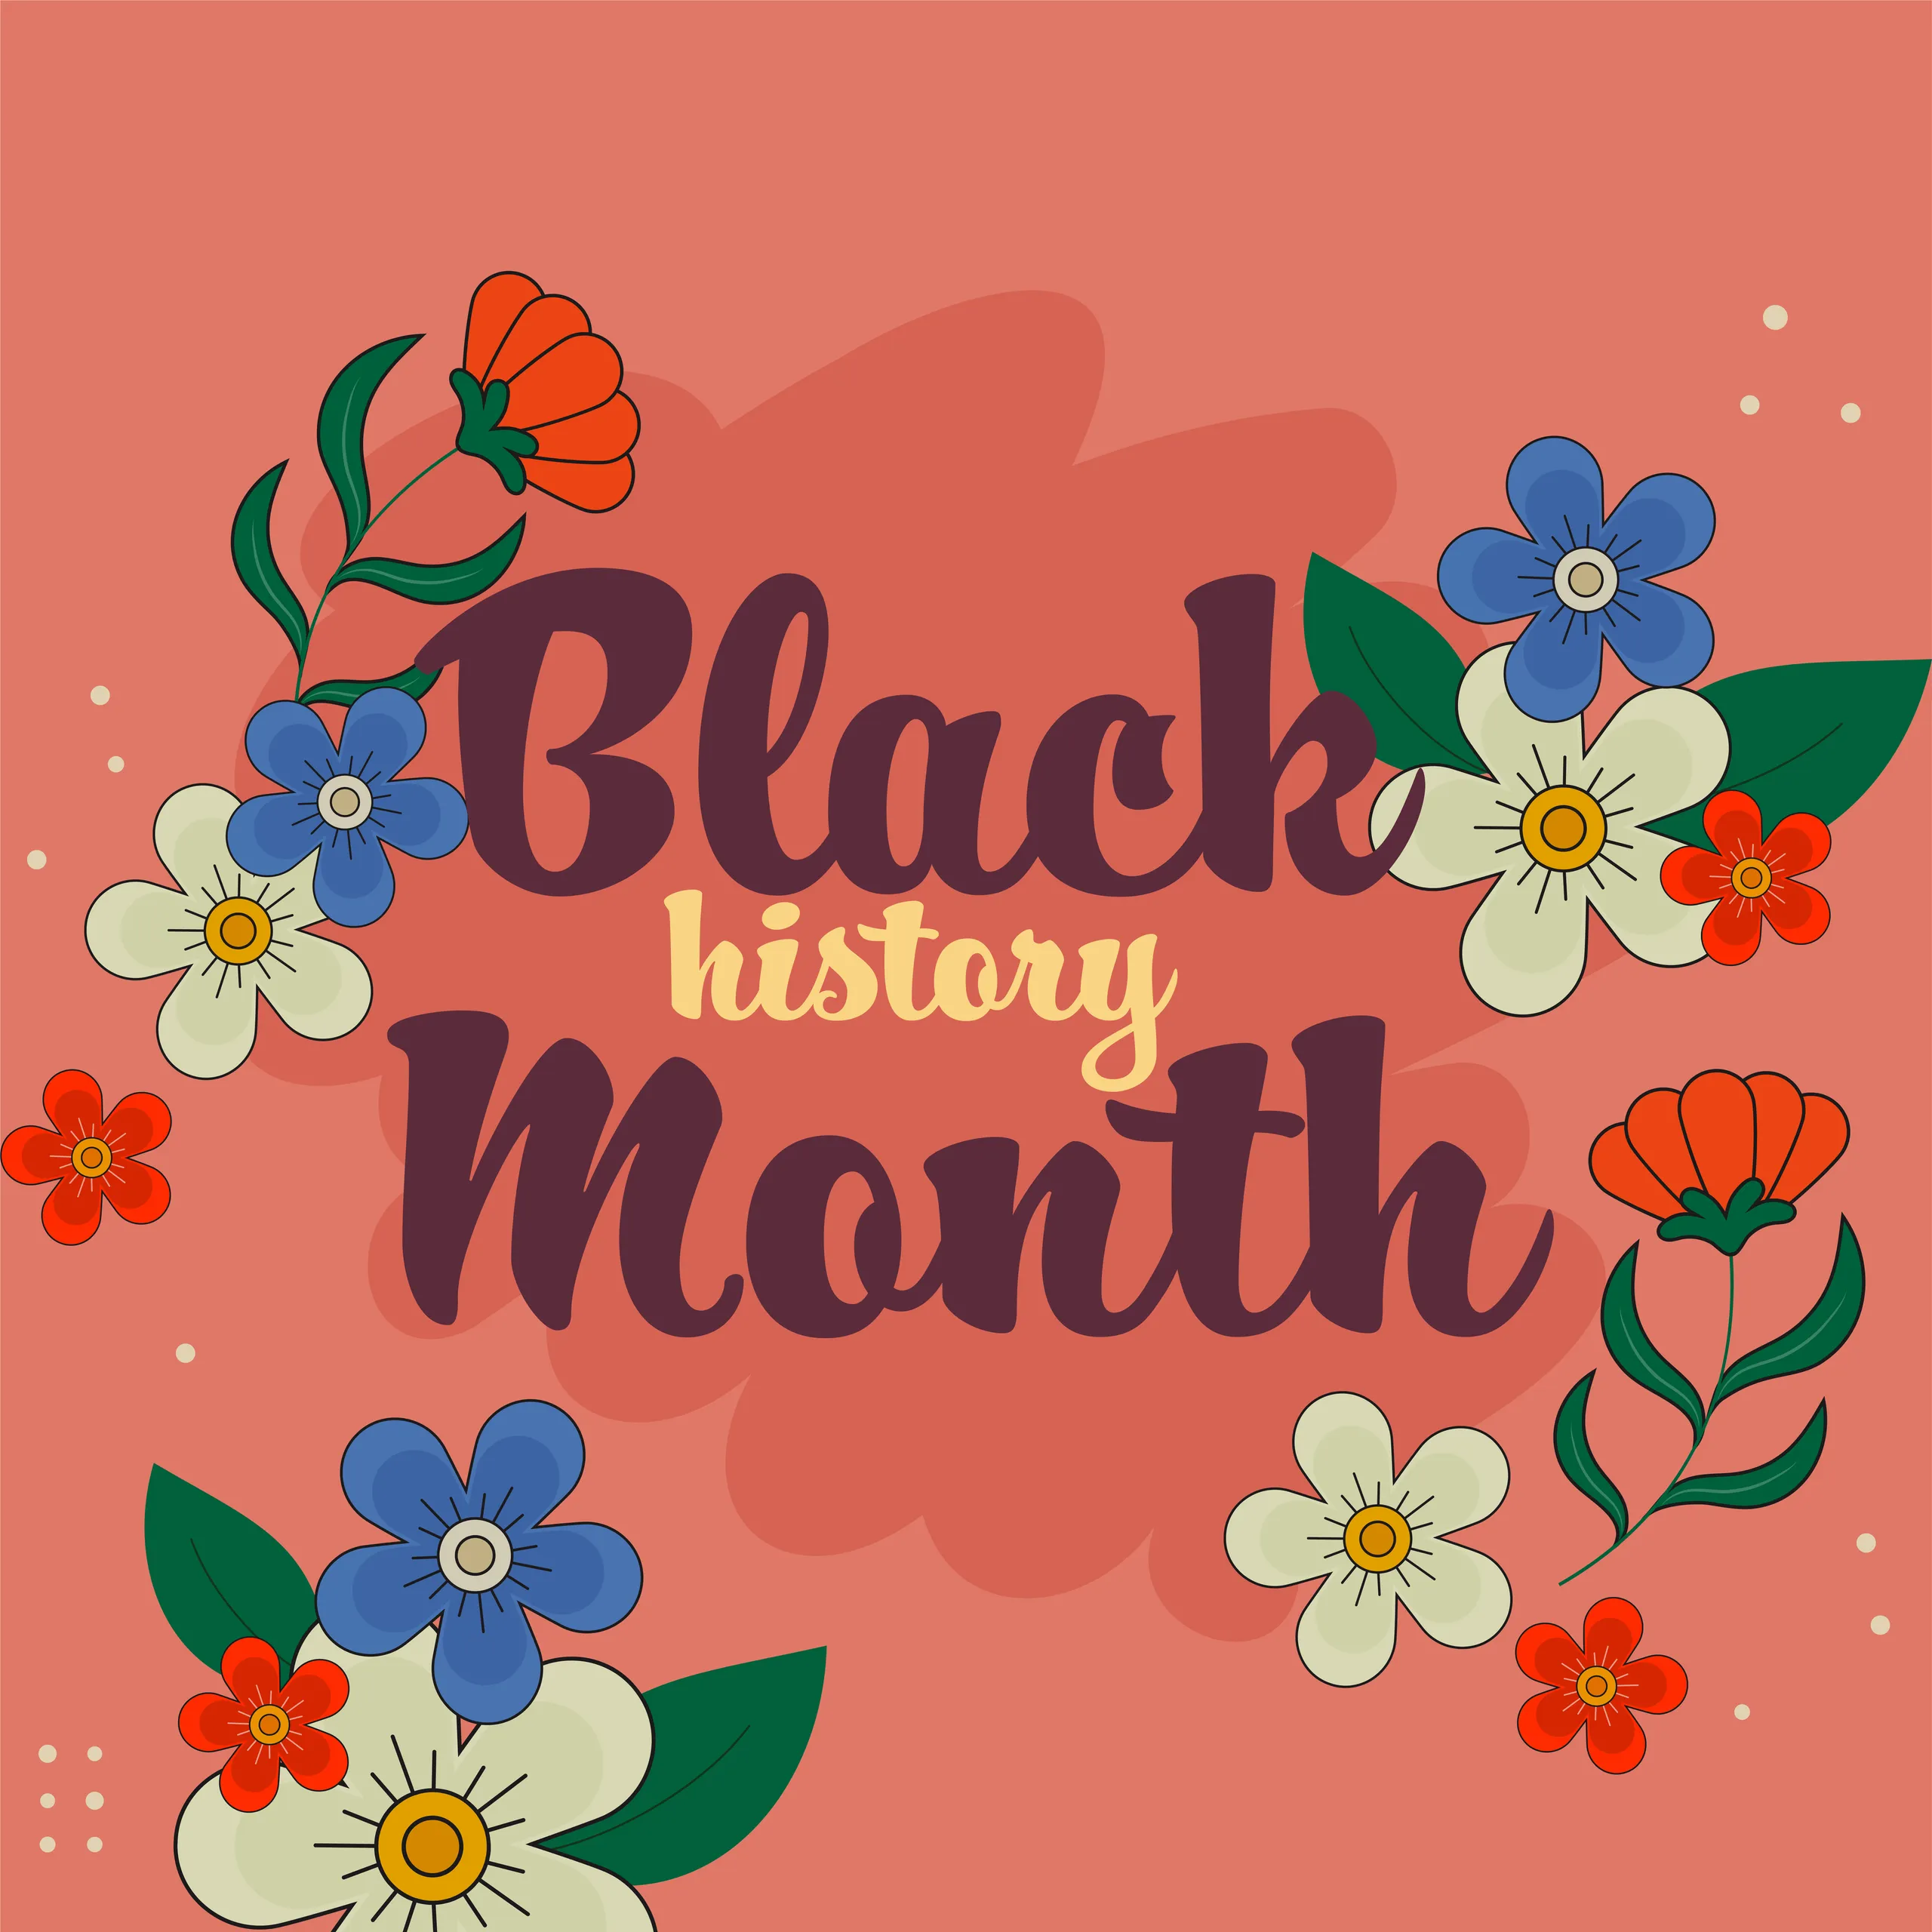 Exploring the Significance of Black History Month - FreePixel Blog